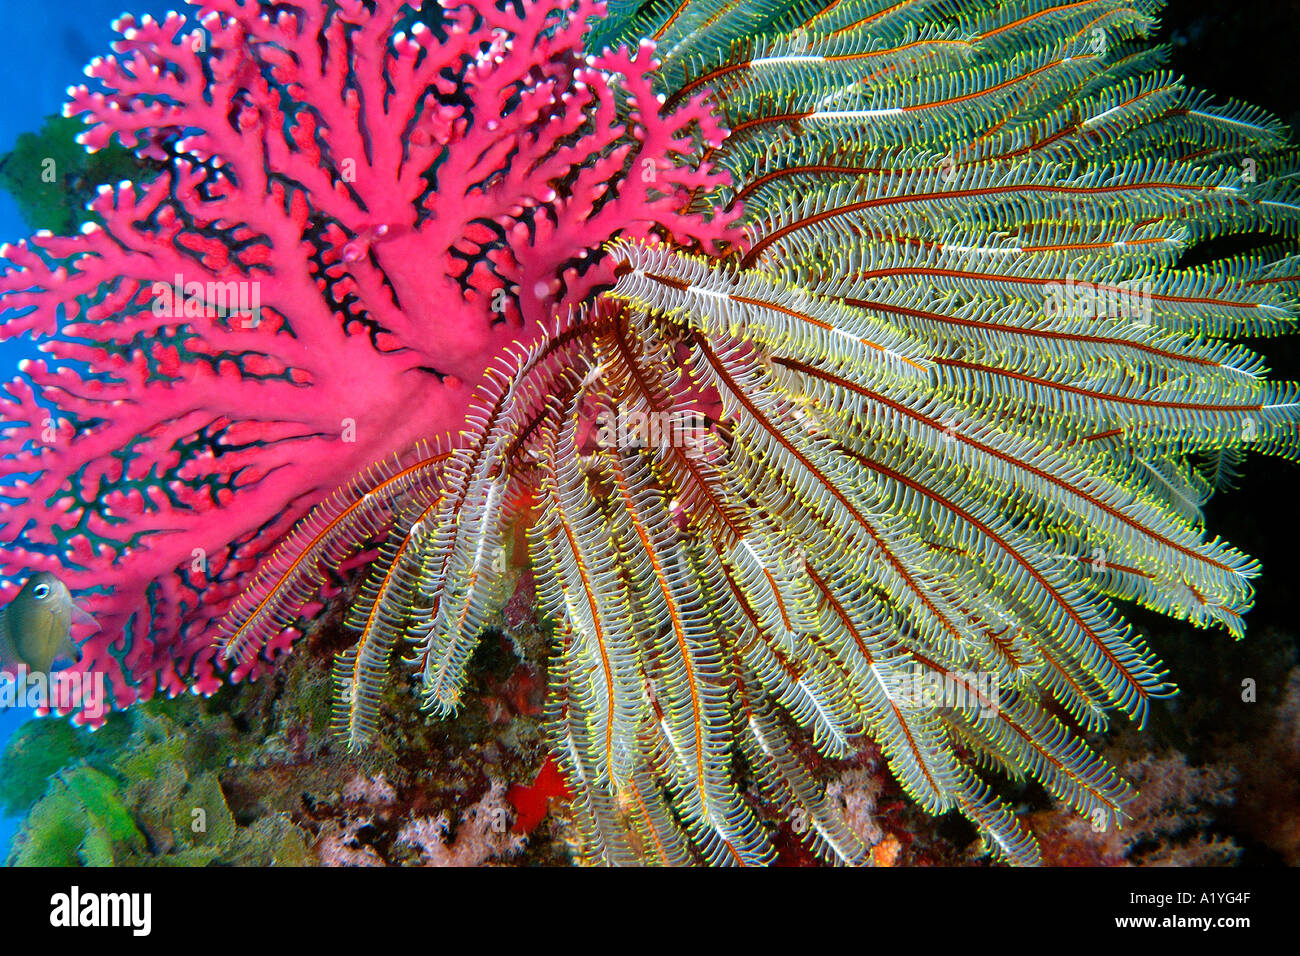 Red Lace coral Distichopora violacea and crinoid Namu atoll Marshall Islands N Pacific Stock Photo